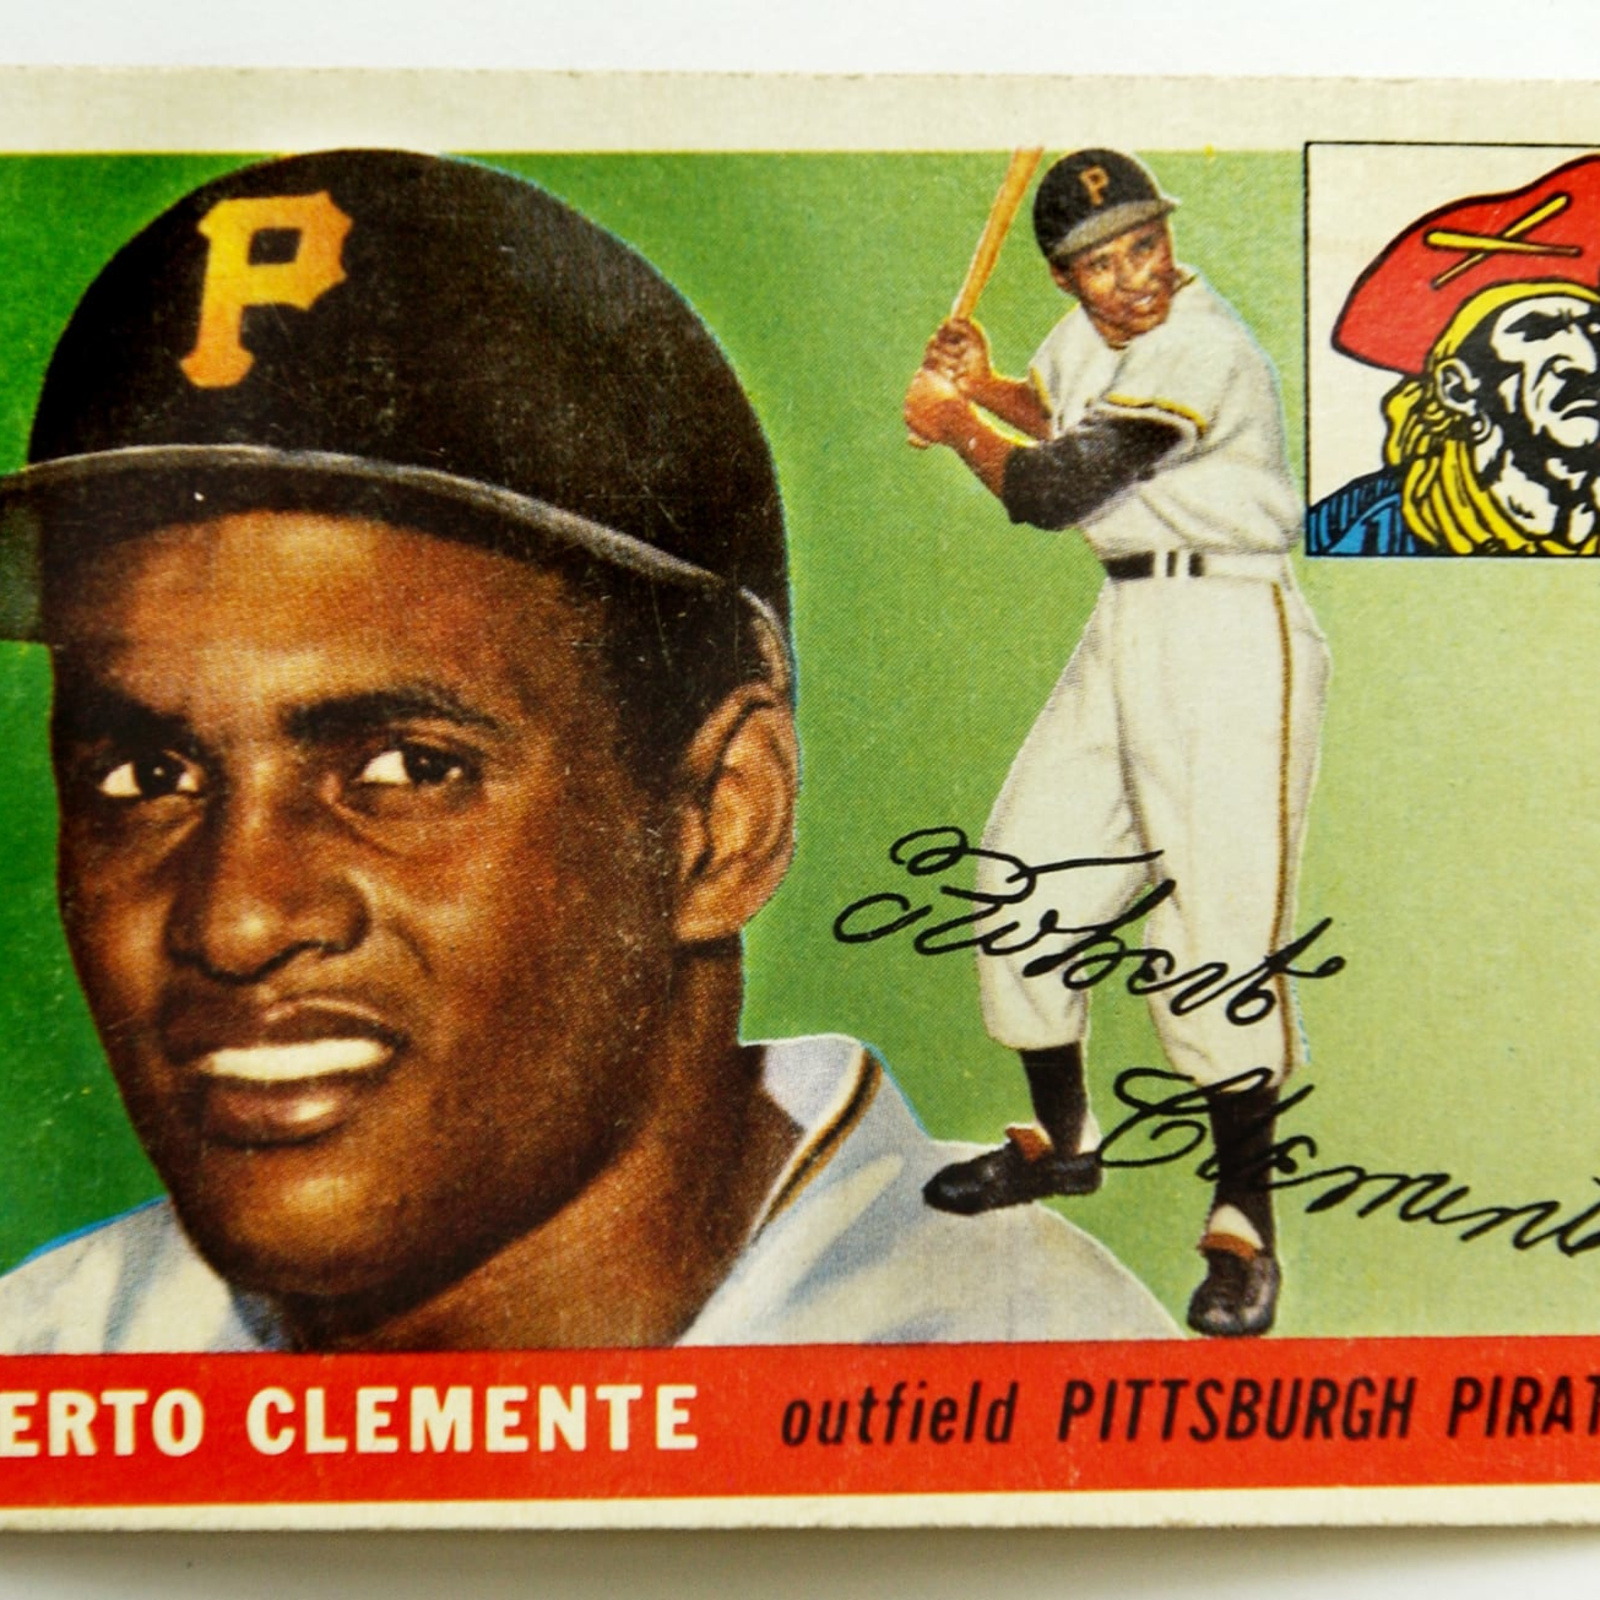 Roberto Clemente 1955 Topps Rookie Card Auctions for Near Record